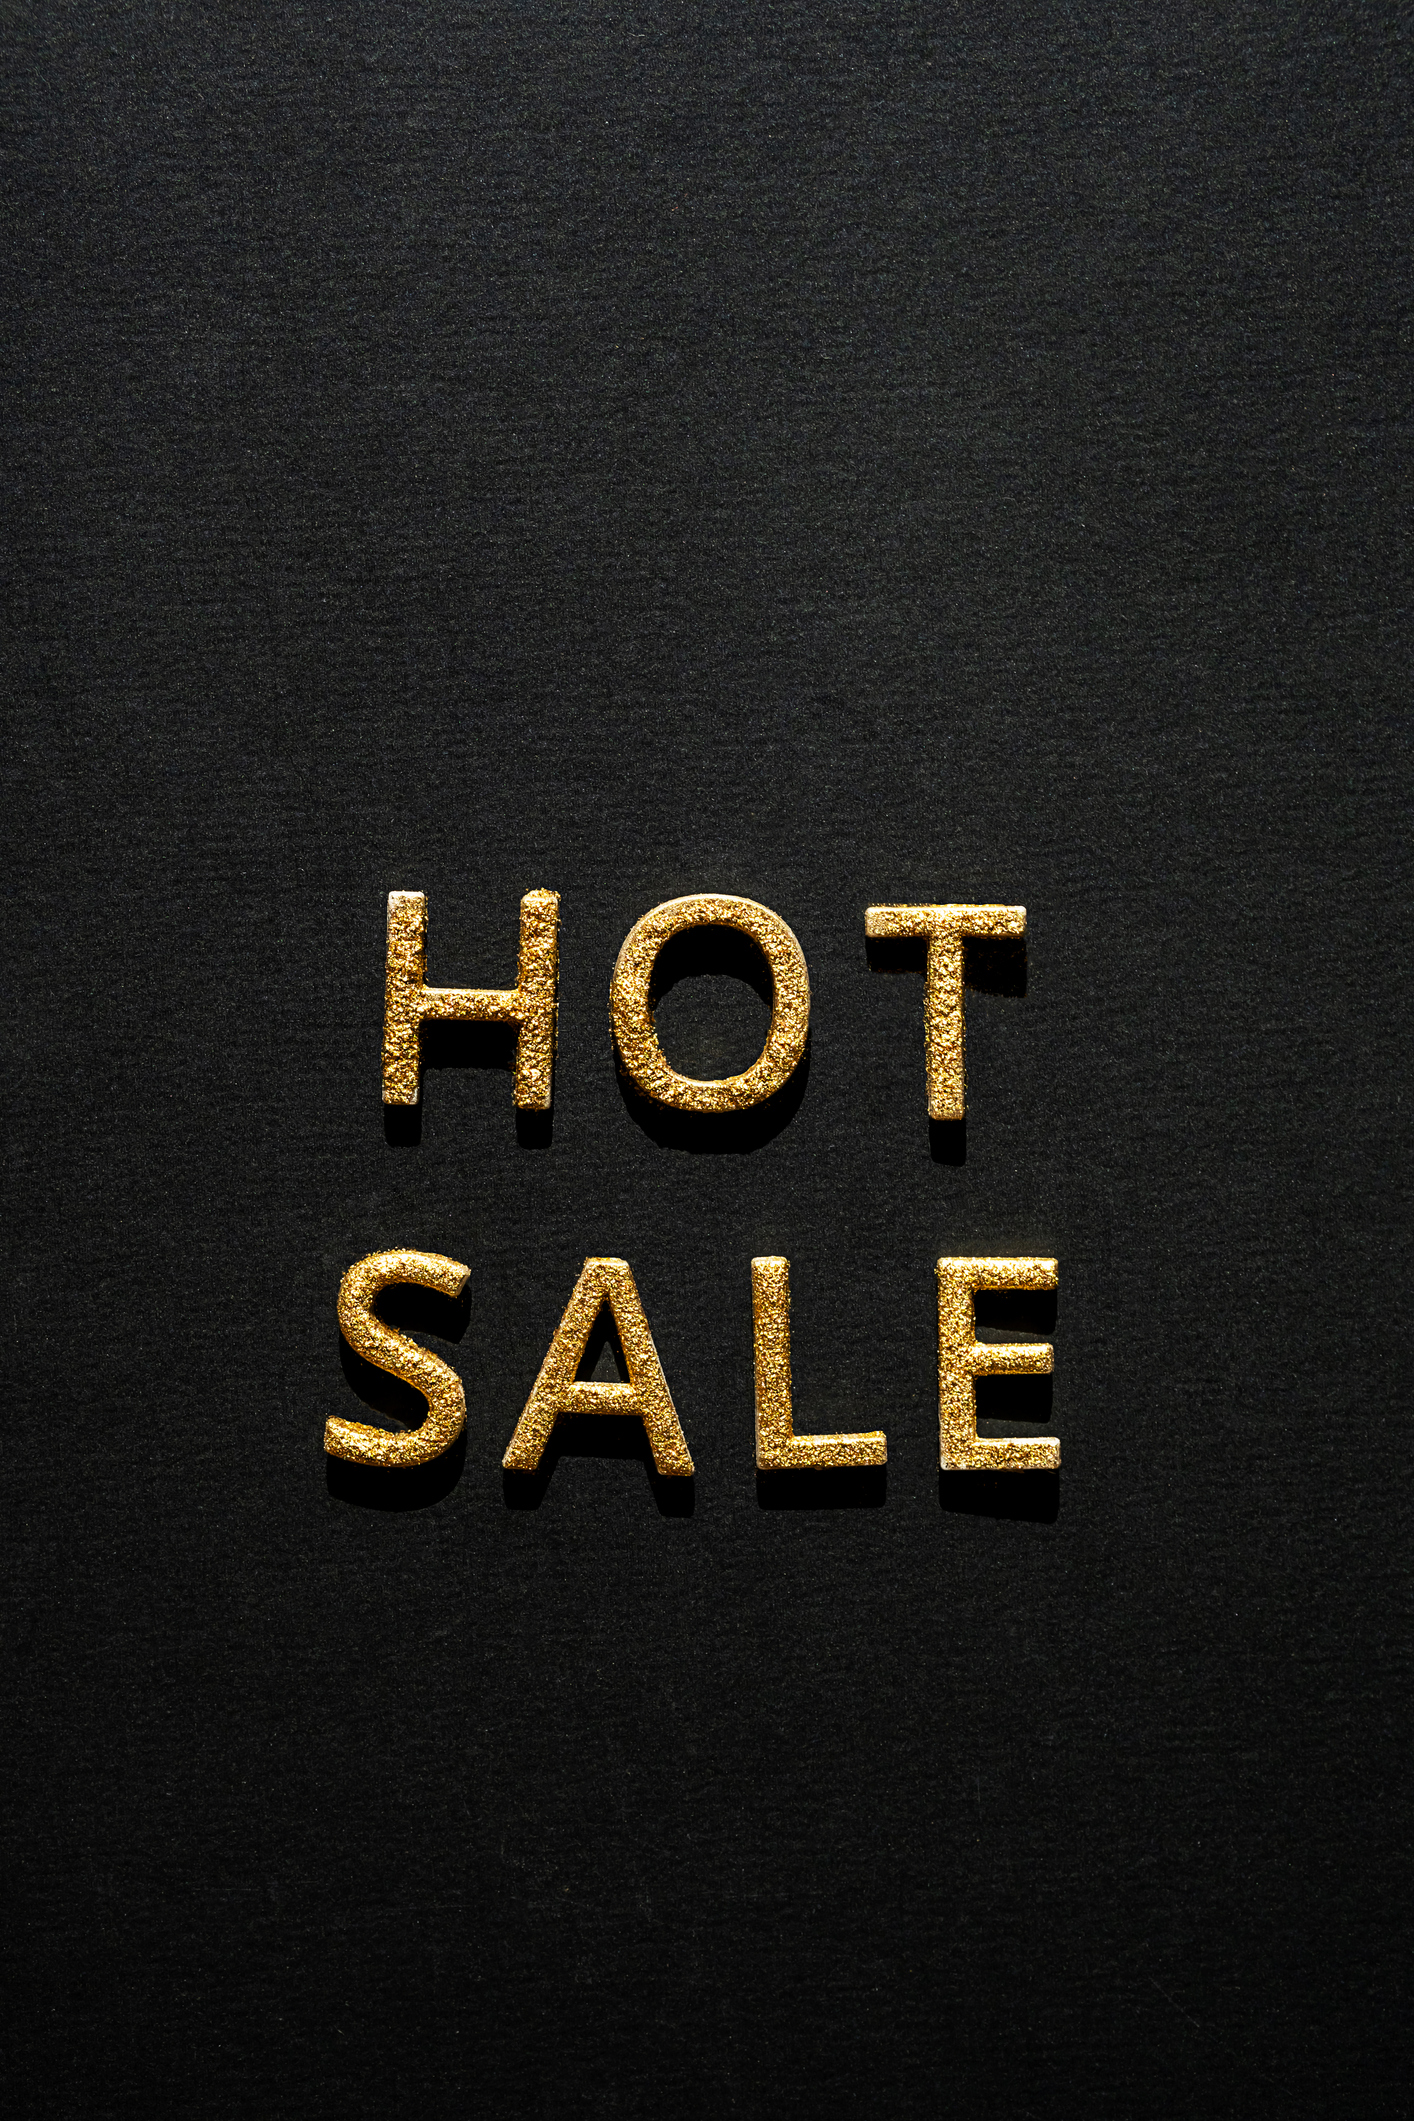 Hot sale – golden words on black. Online sale or clearance store concept.